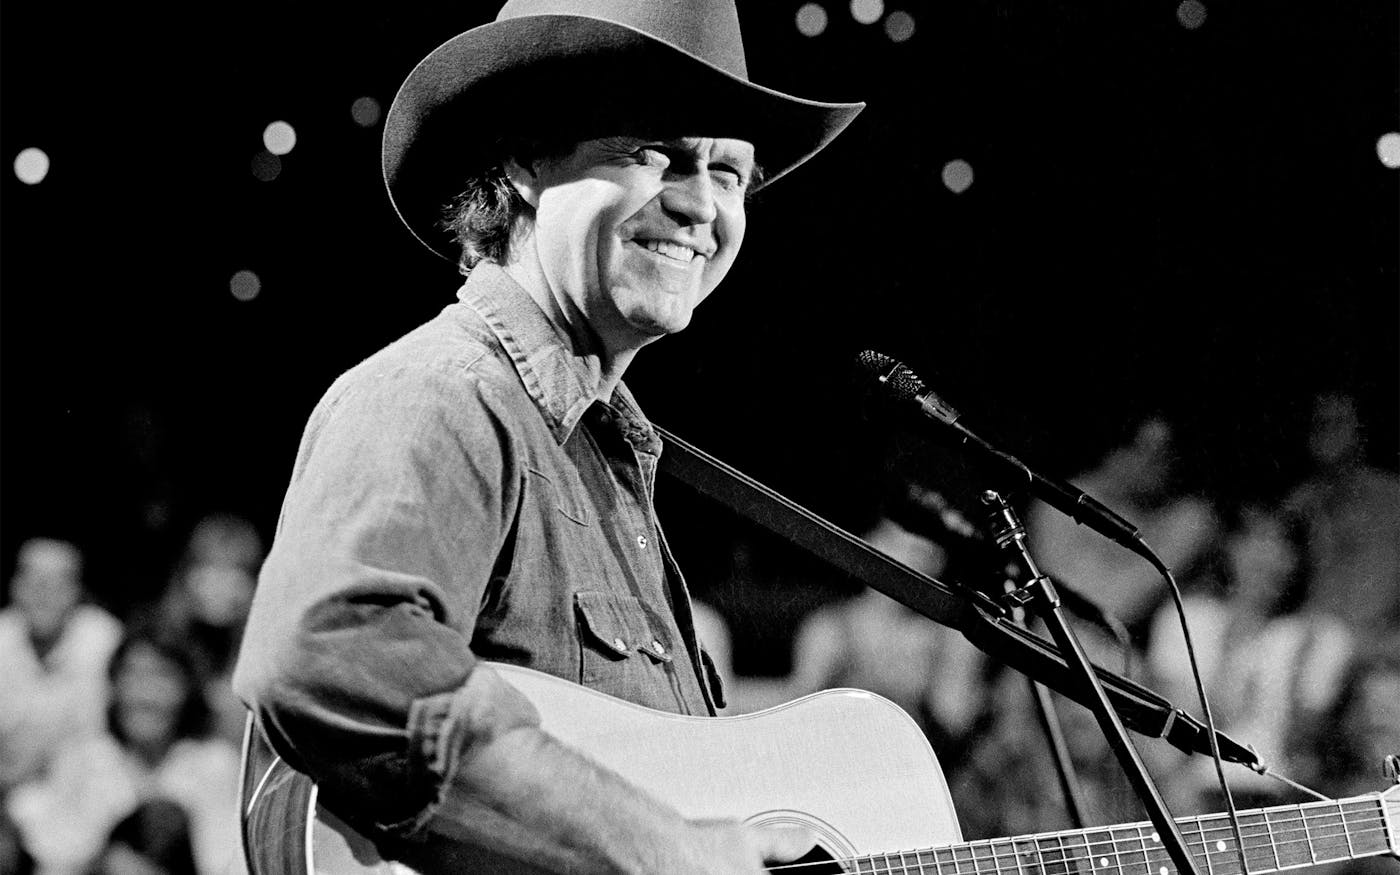 Billy Joe Shaver, the Blustery, Tenderhearted Country Star Known